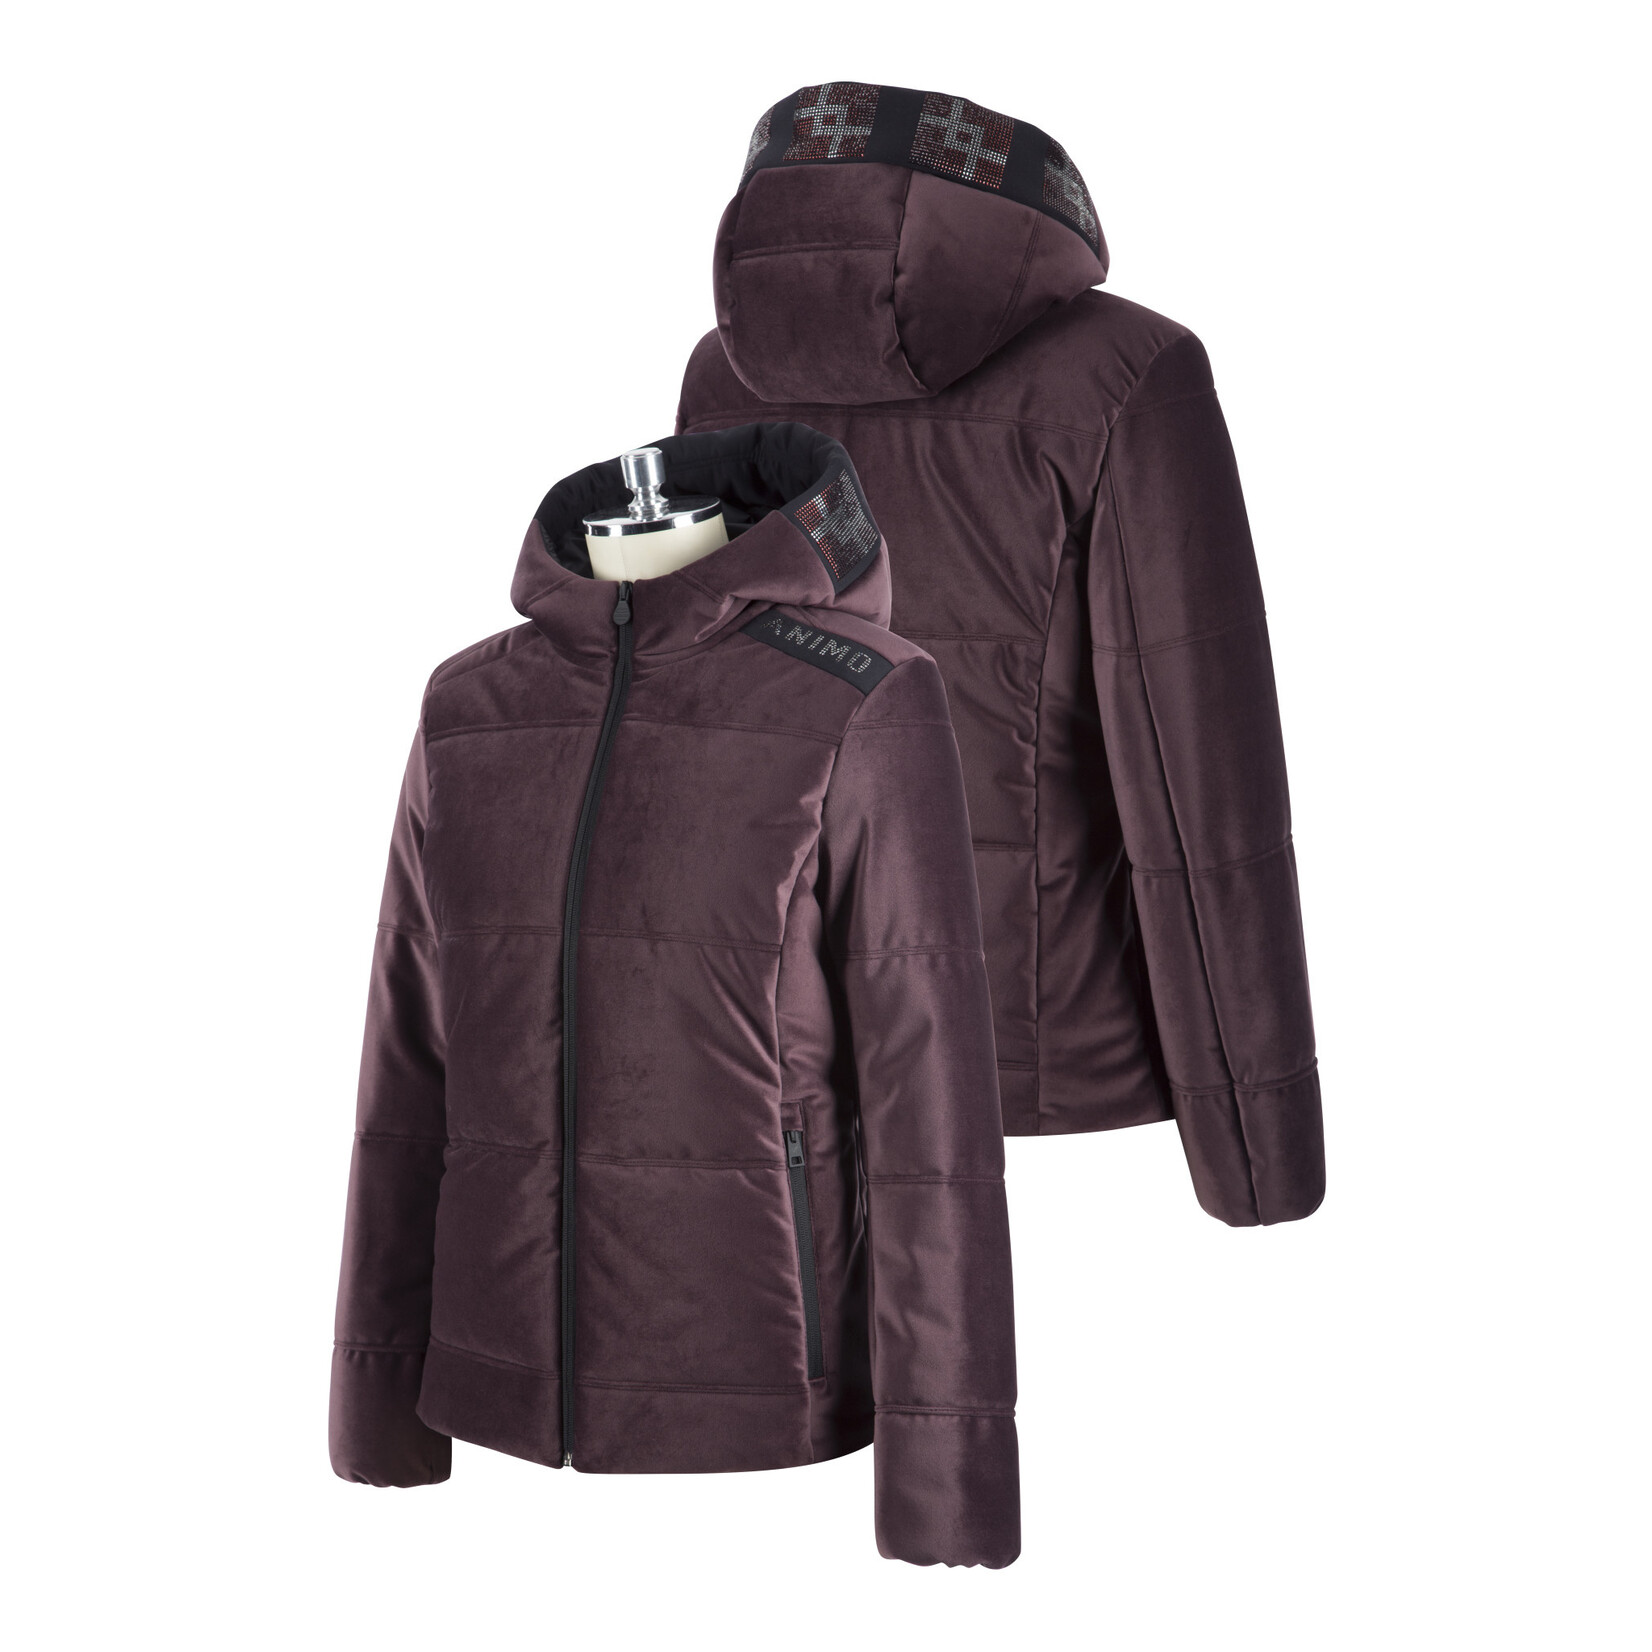 Animo Liviero Women's padded Ultra-soft and Cozy Jacket with snap-down hood and elegant Crystal logo on shoulder and framing the hood